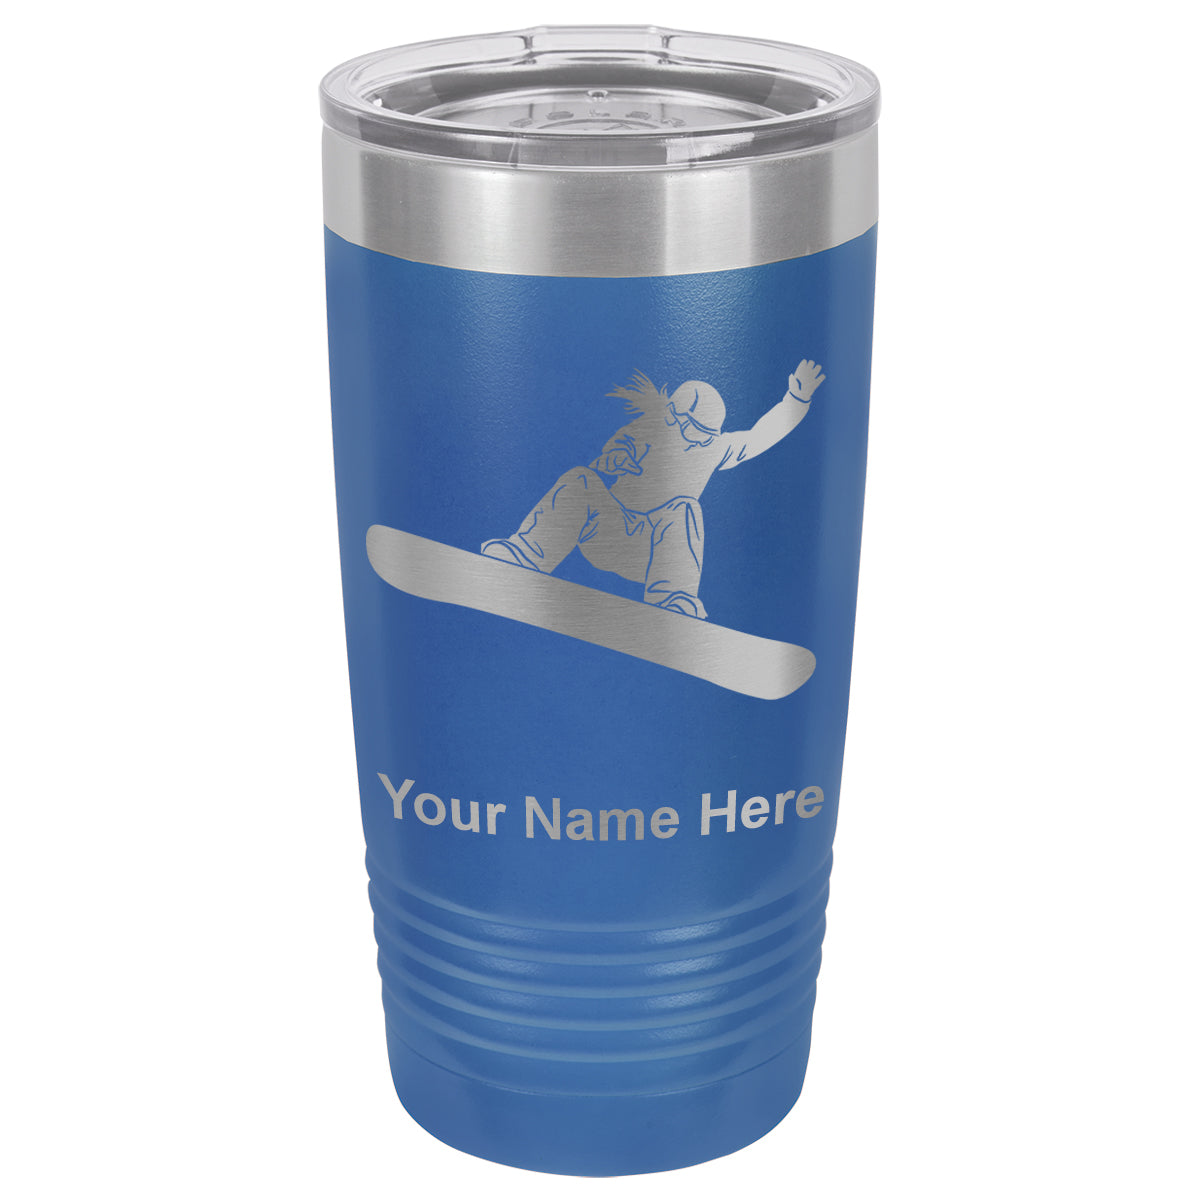 20oz Vacuum Insulated Tumbler Mug, Snowboarder Woman, Personalized Engraving Included